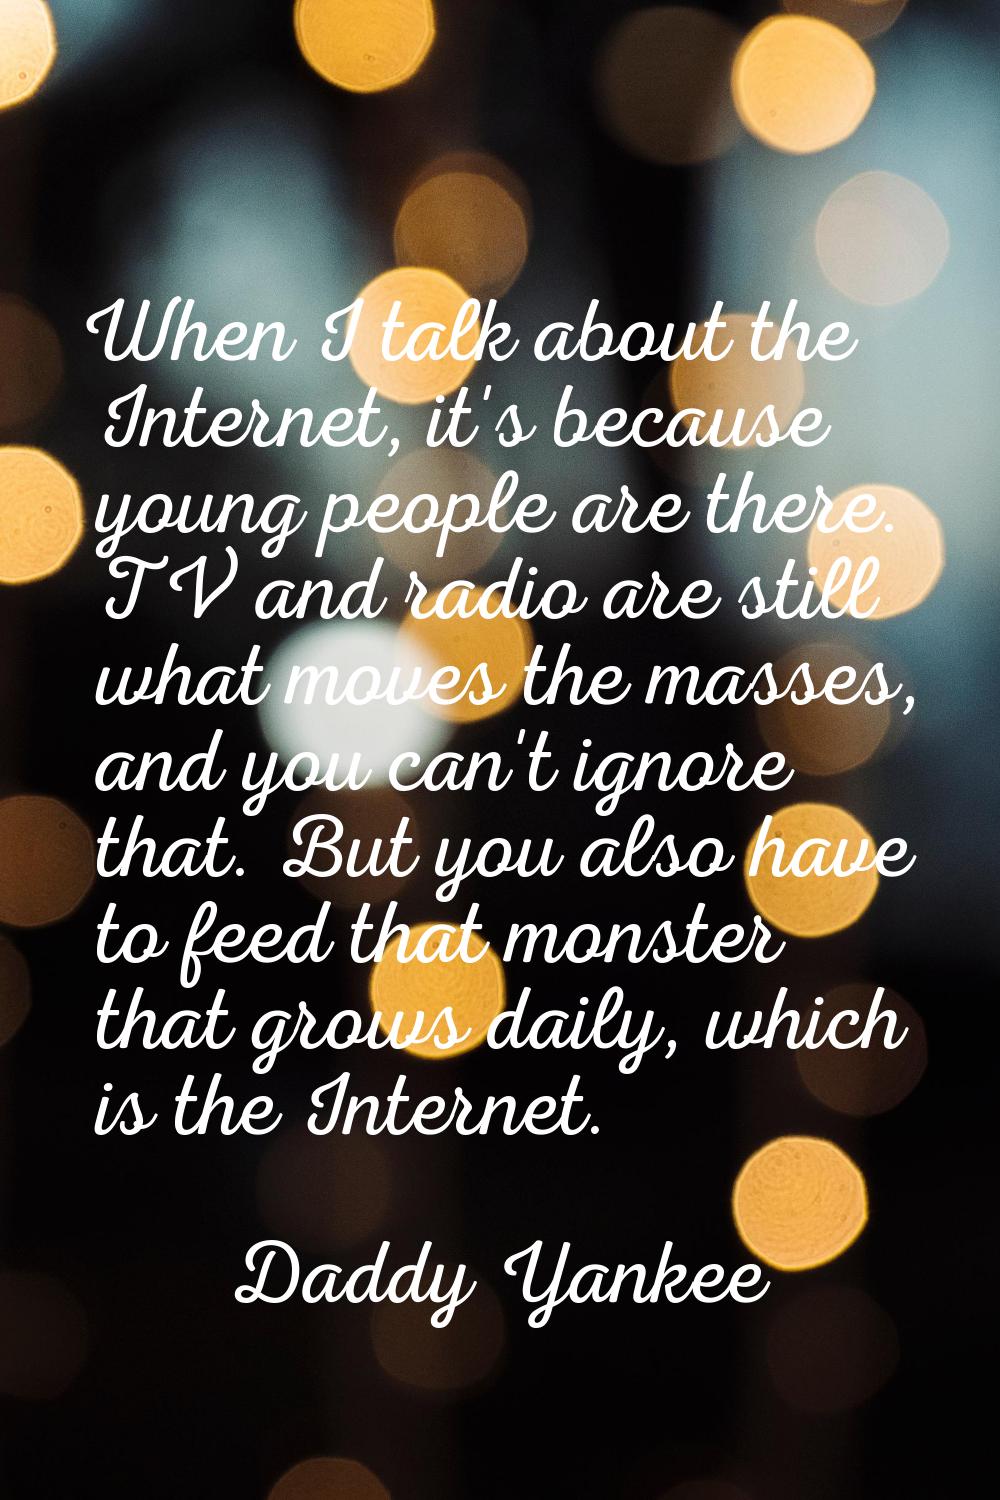 When I talk about the Internet, it's because young people are there. TV and radio are still what mo